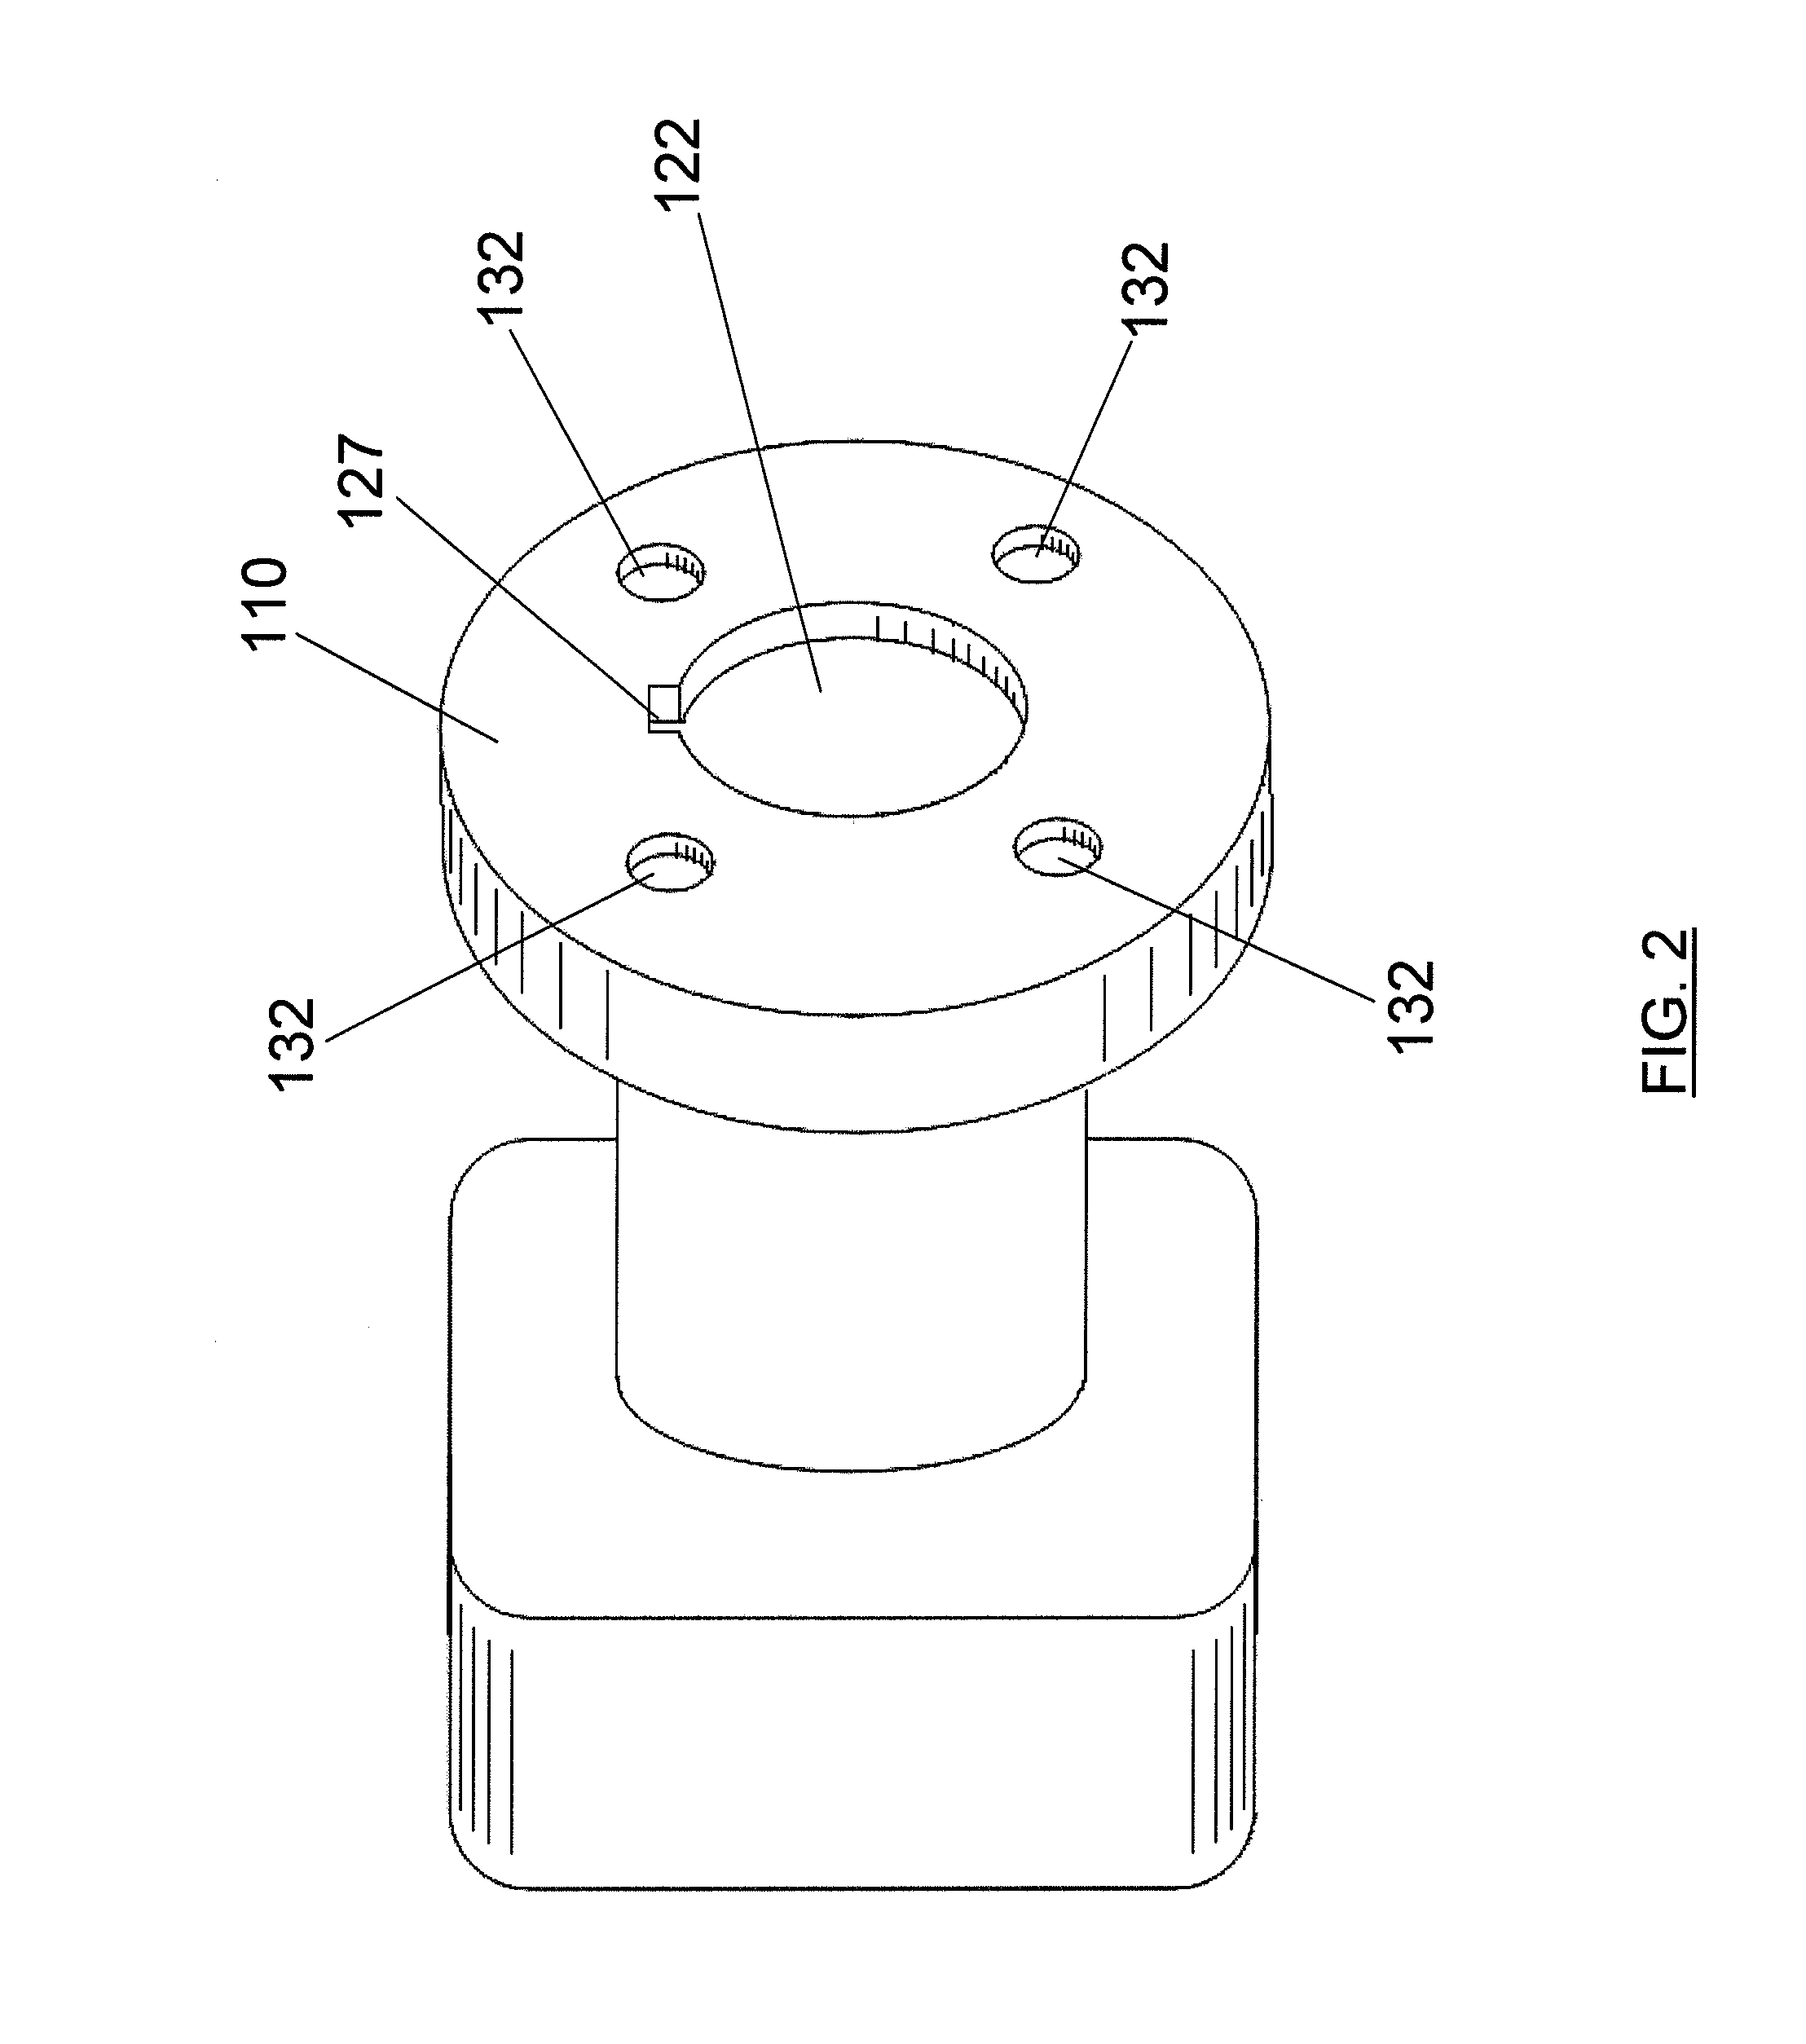 Method, apparatus and computer program product for simplifying a representative of a computer-aided design model